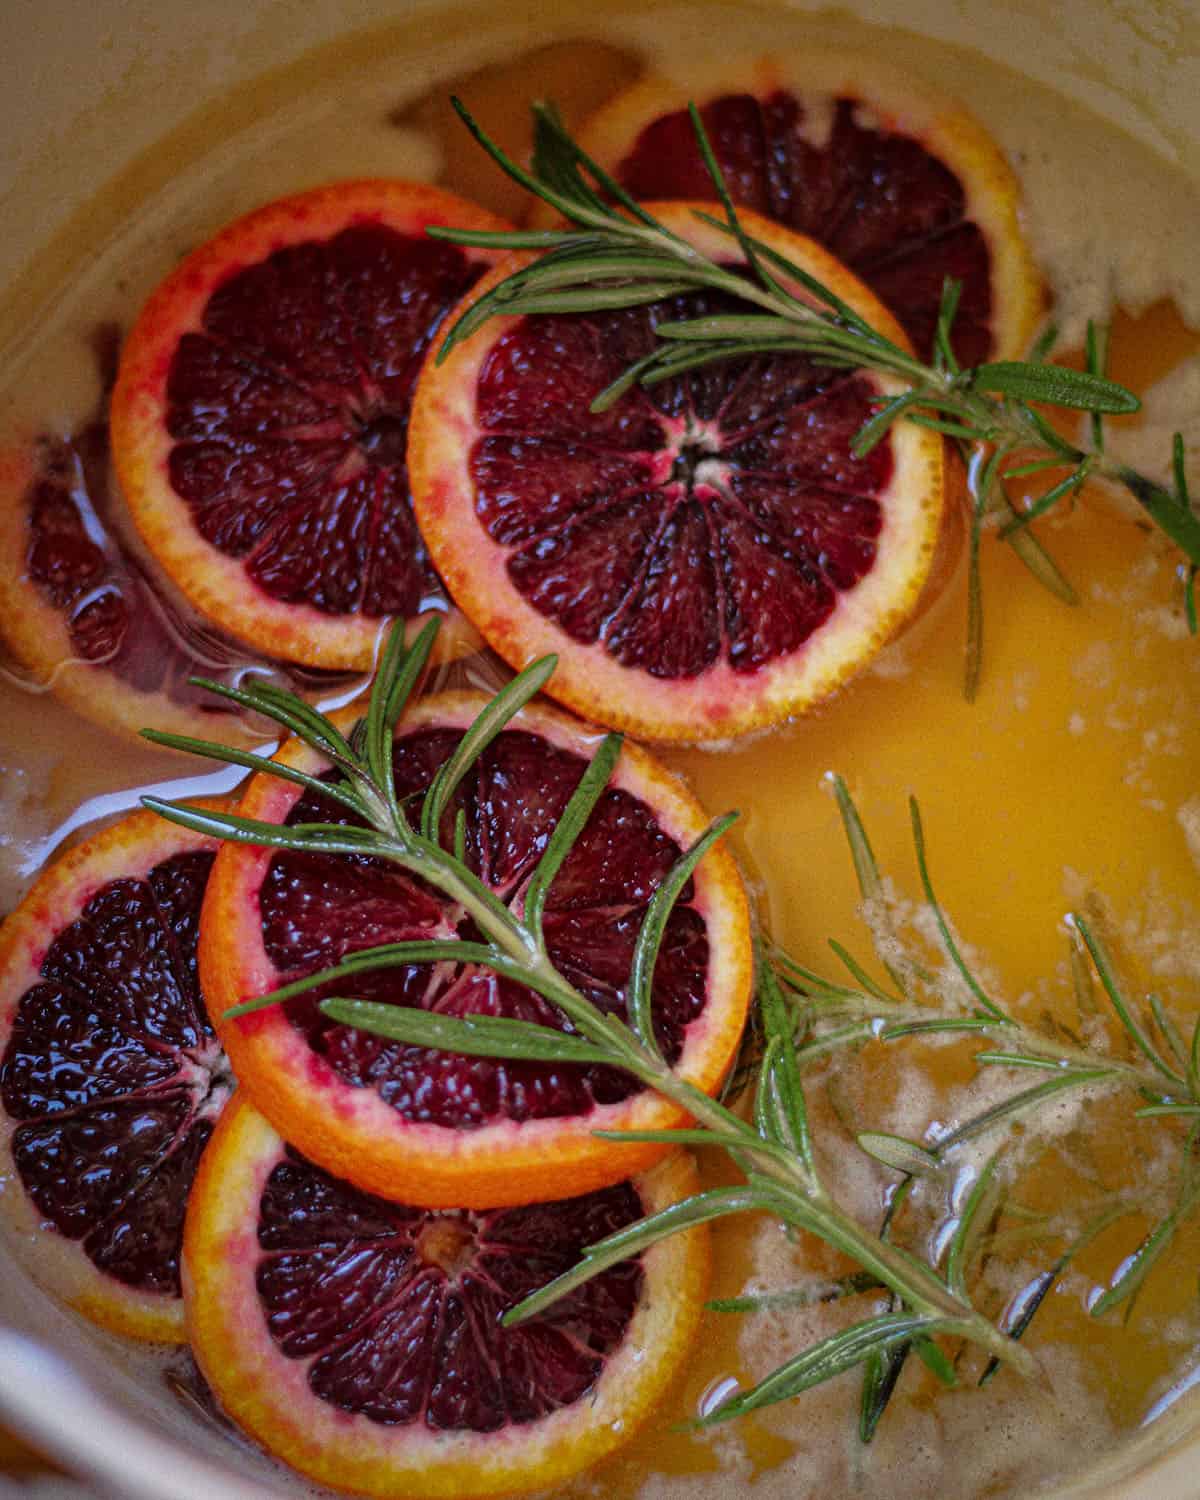 Slices of blood oranges and sprigs of rosemary simmering in a pan to make simple syrup.